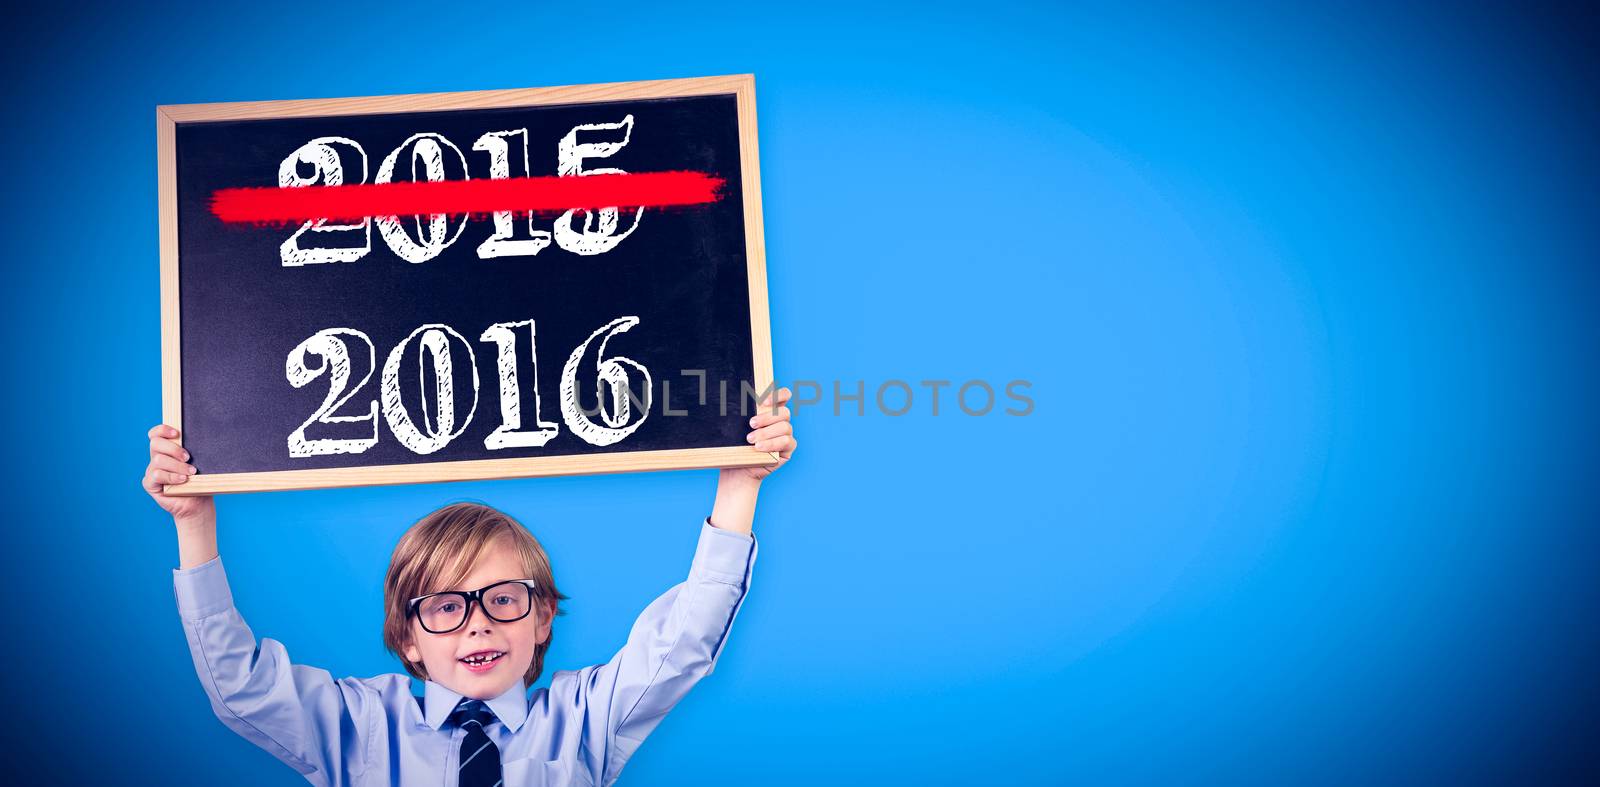 Cute pupil holding chalkboard against blue background with vignette